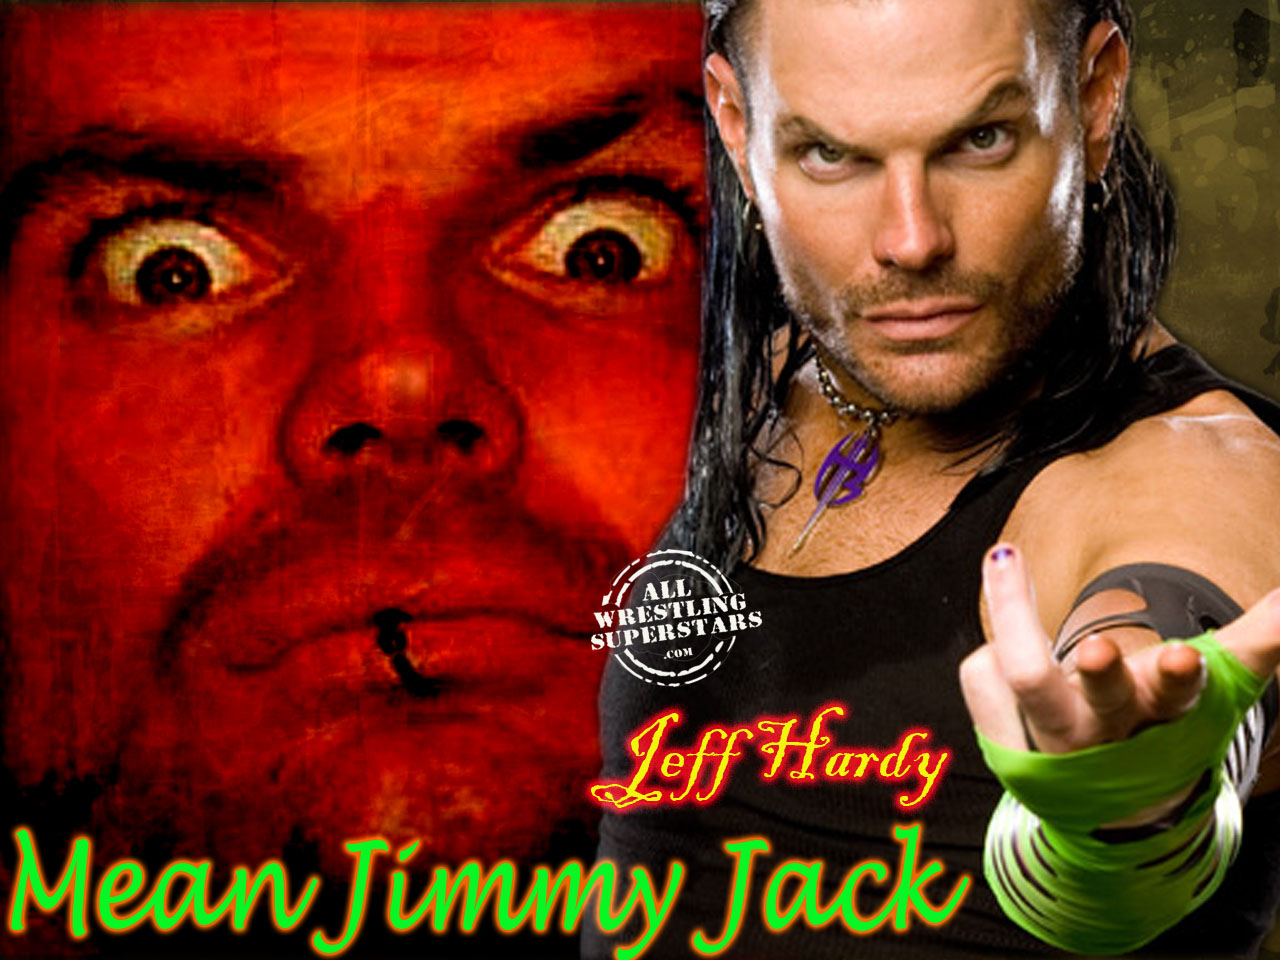 Jeff Hardy In A Pose With His Steady Looks Click On Image To Enlarge